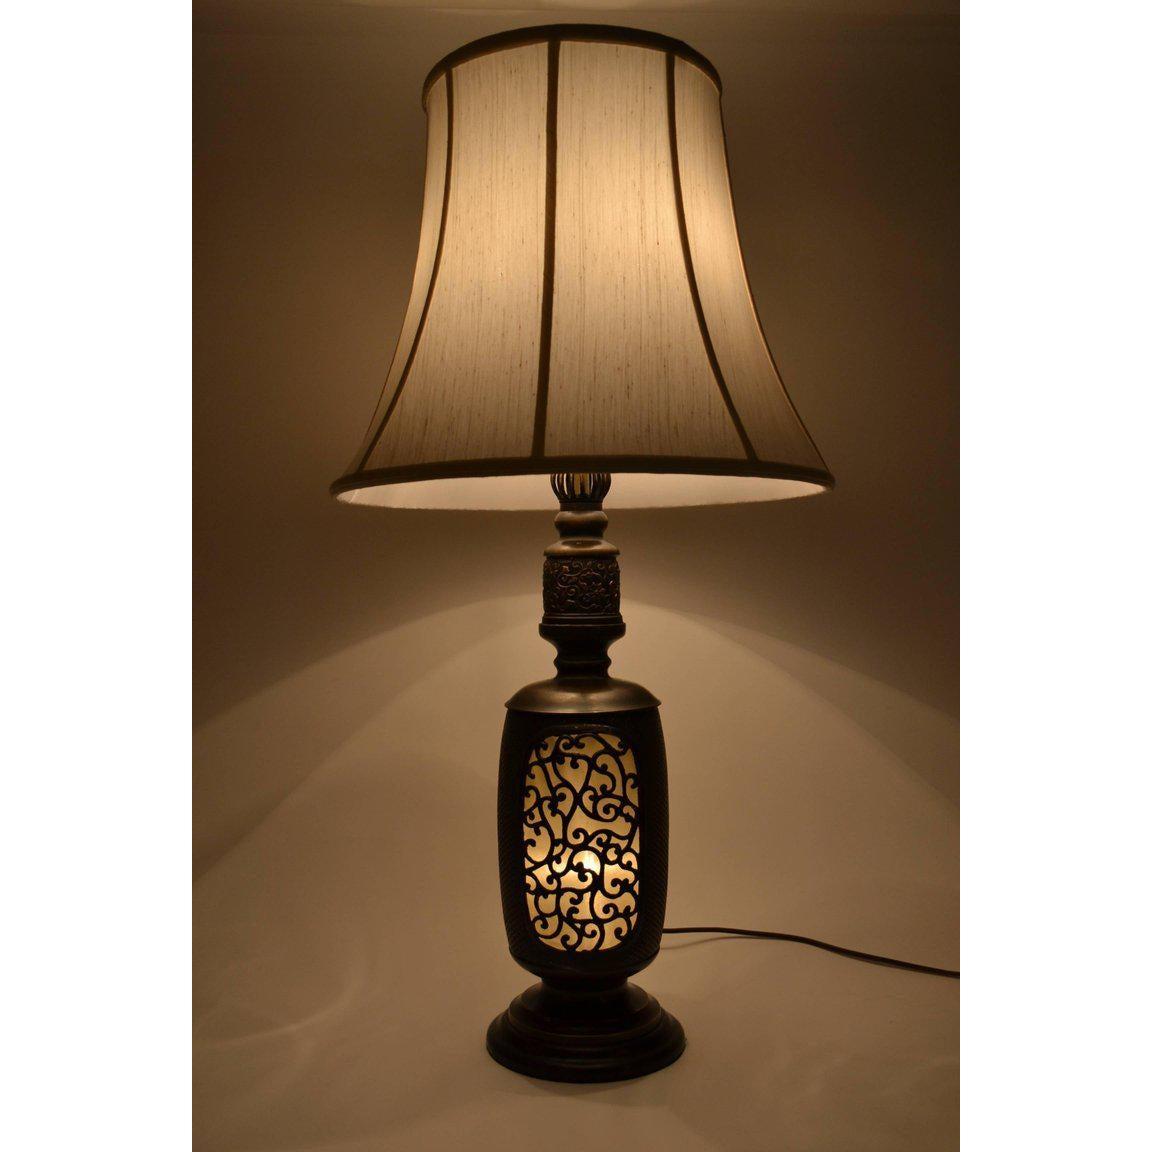 Antique Chinese bronze lantern lamp. The light emitting from the delicate tracery is soft and pleasing.
 